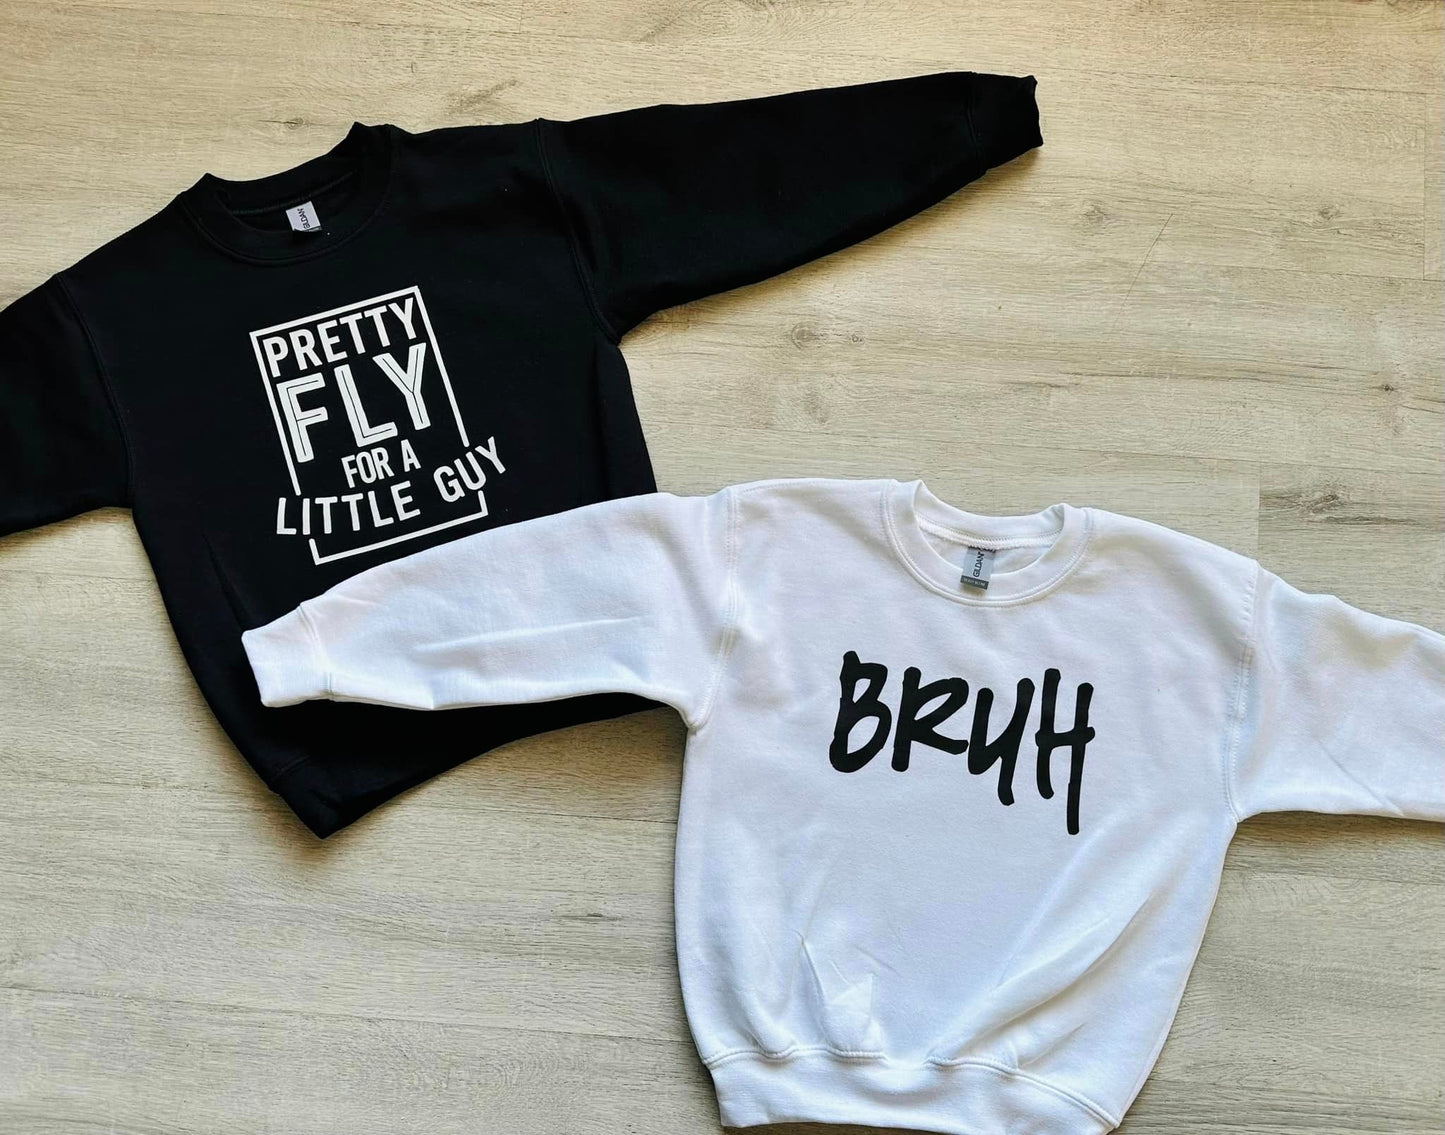 Pretty Fly for a Little Guy Crew or T-Shirt